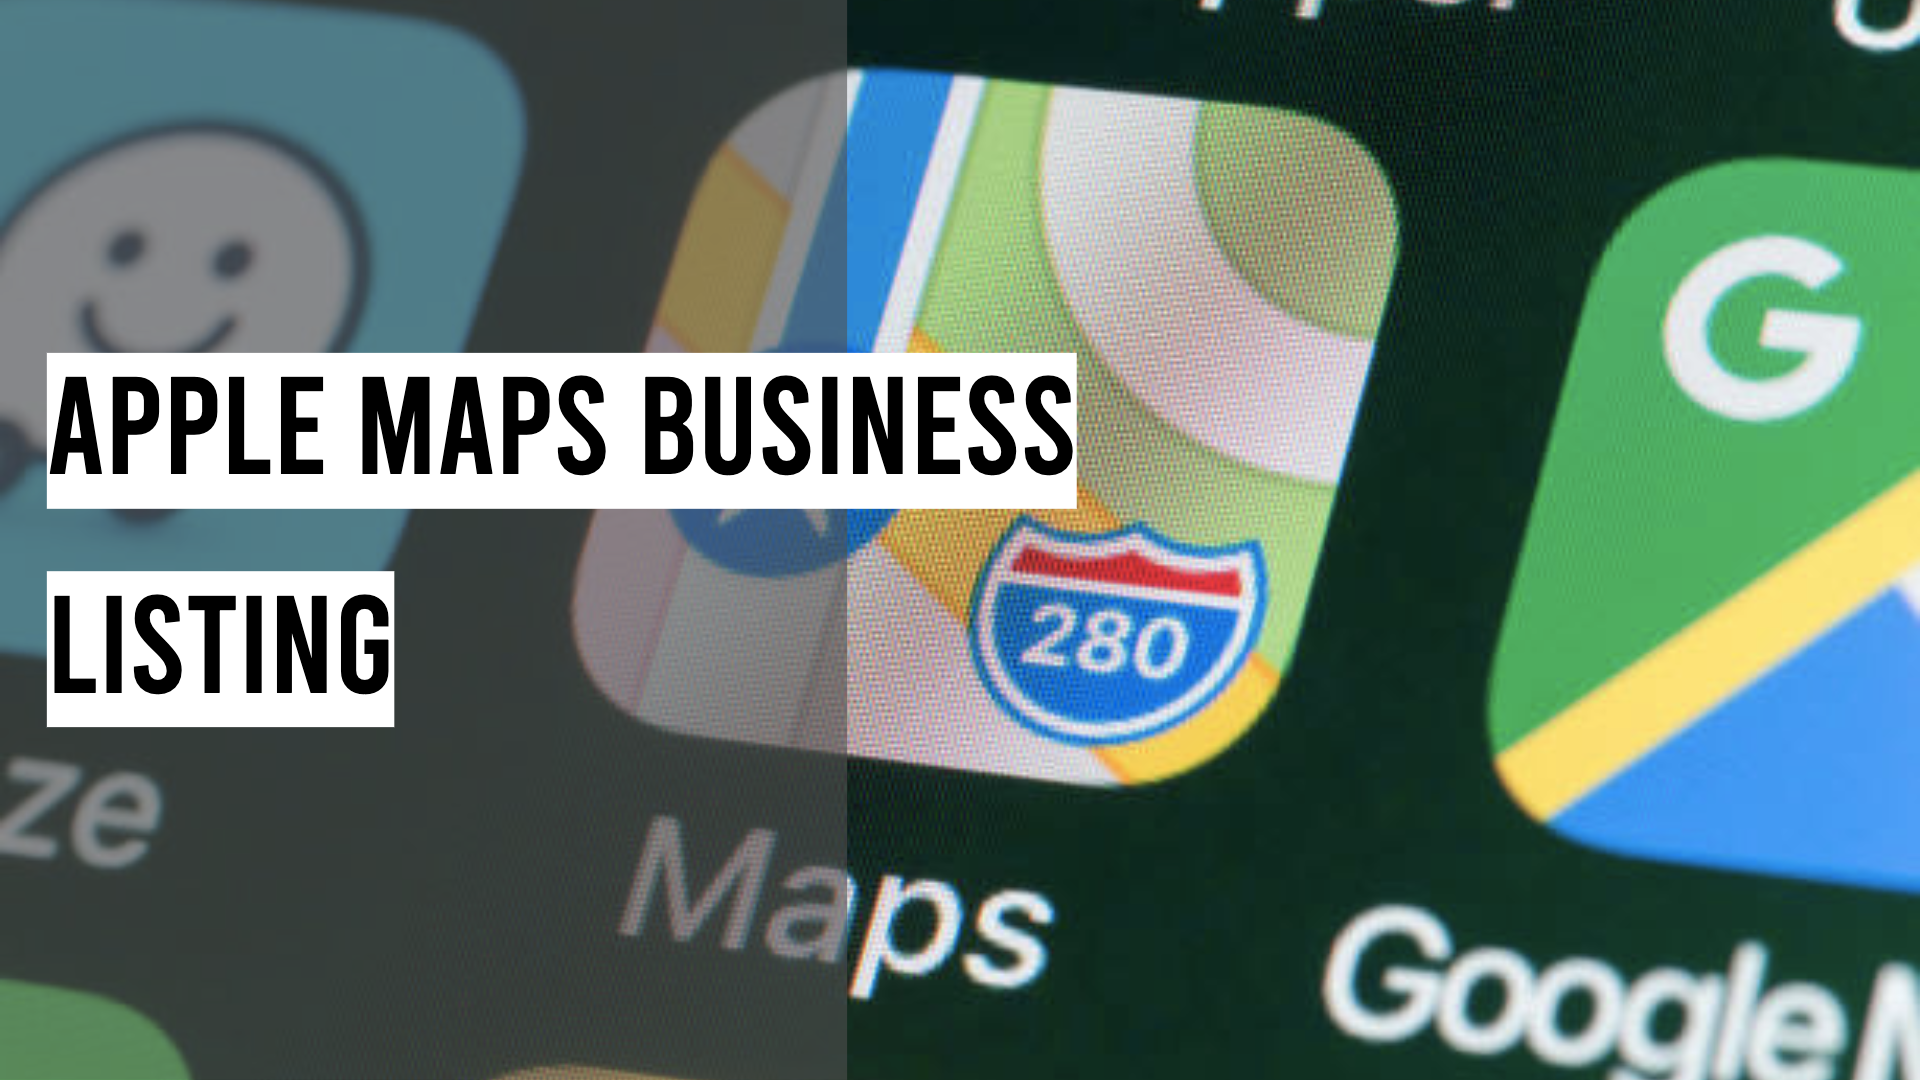 Apple Maps Business Listing